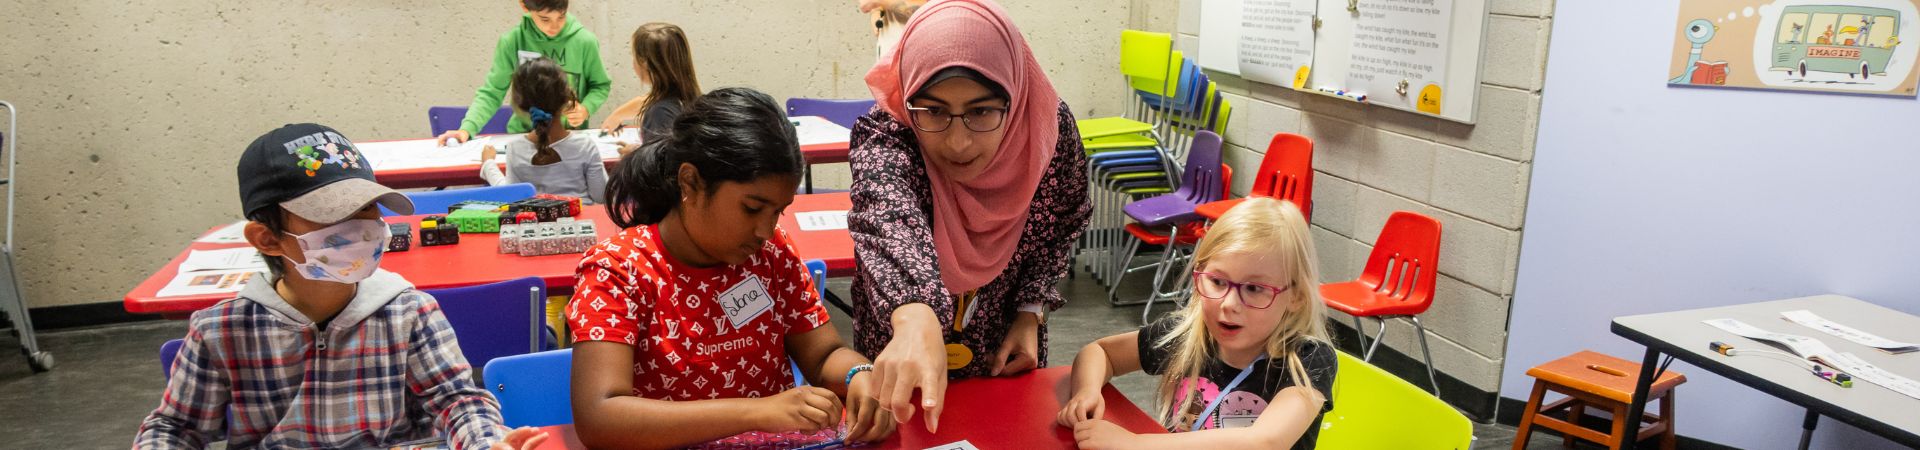 Woman in a hijab and glasses points to an activity. She is surrounded by three school-age kids at a table.